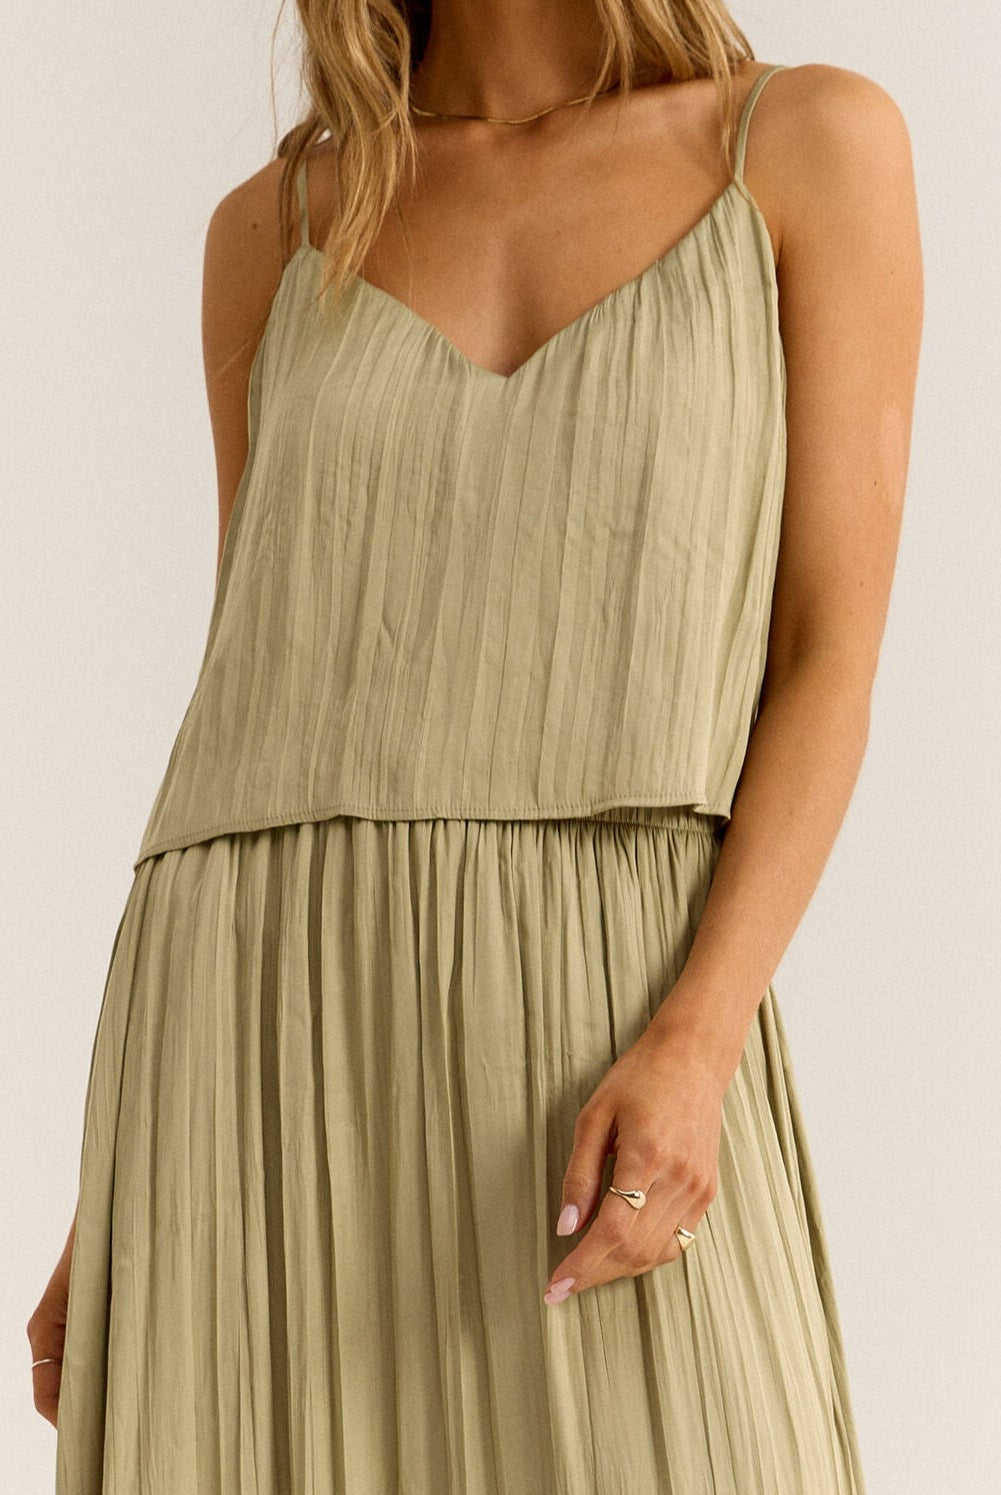 Pleated Green Tank Apex Ethical Boutique